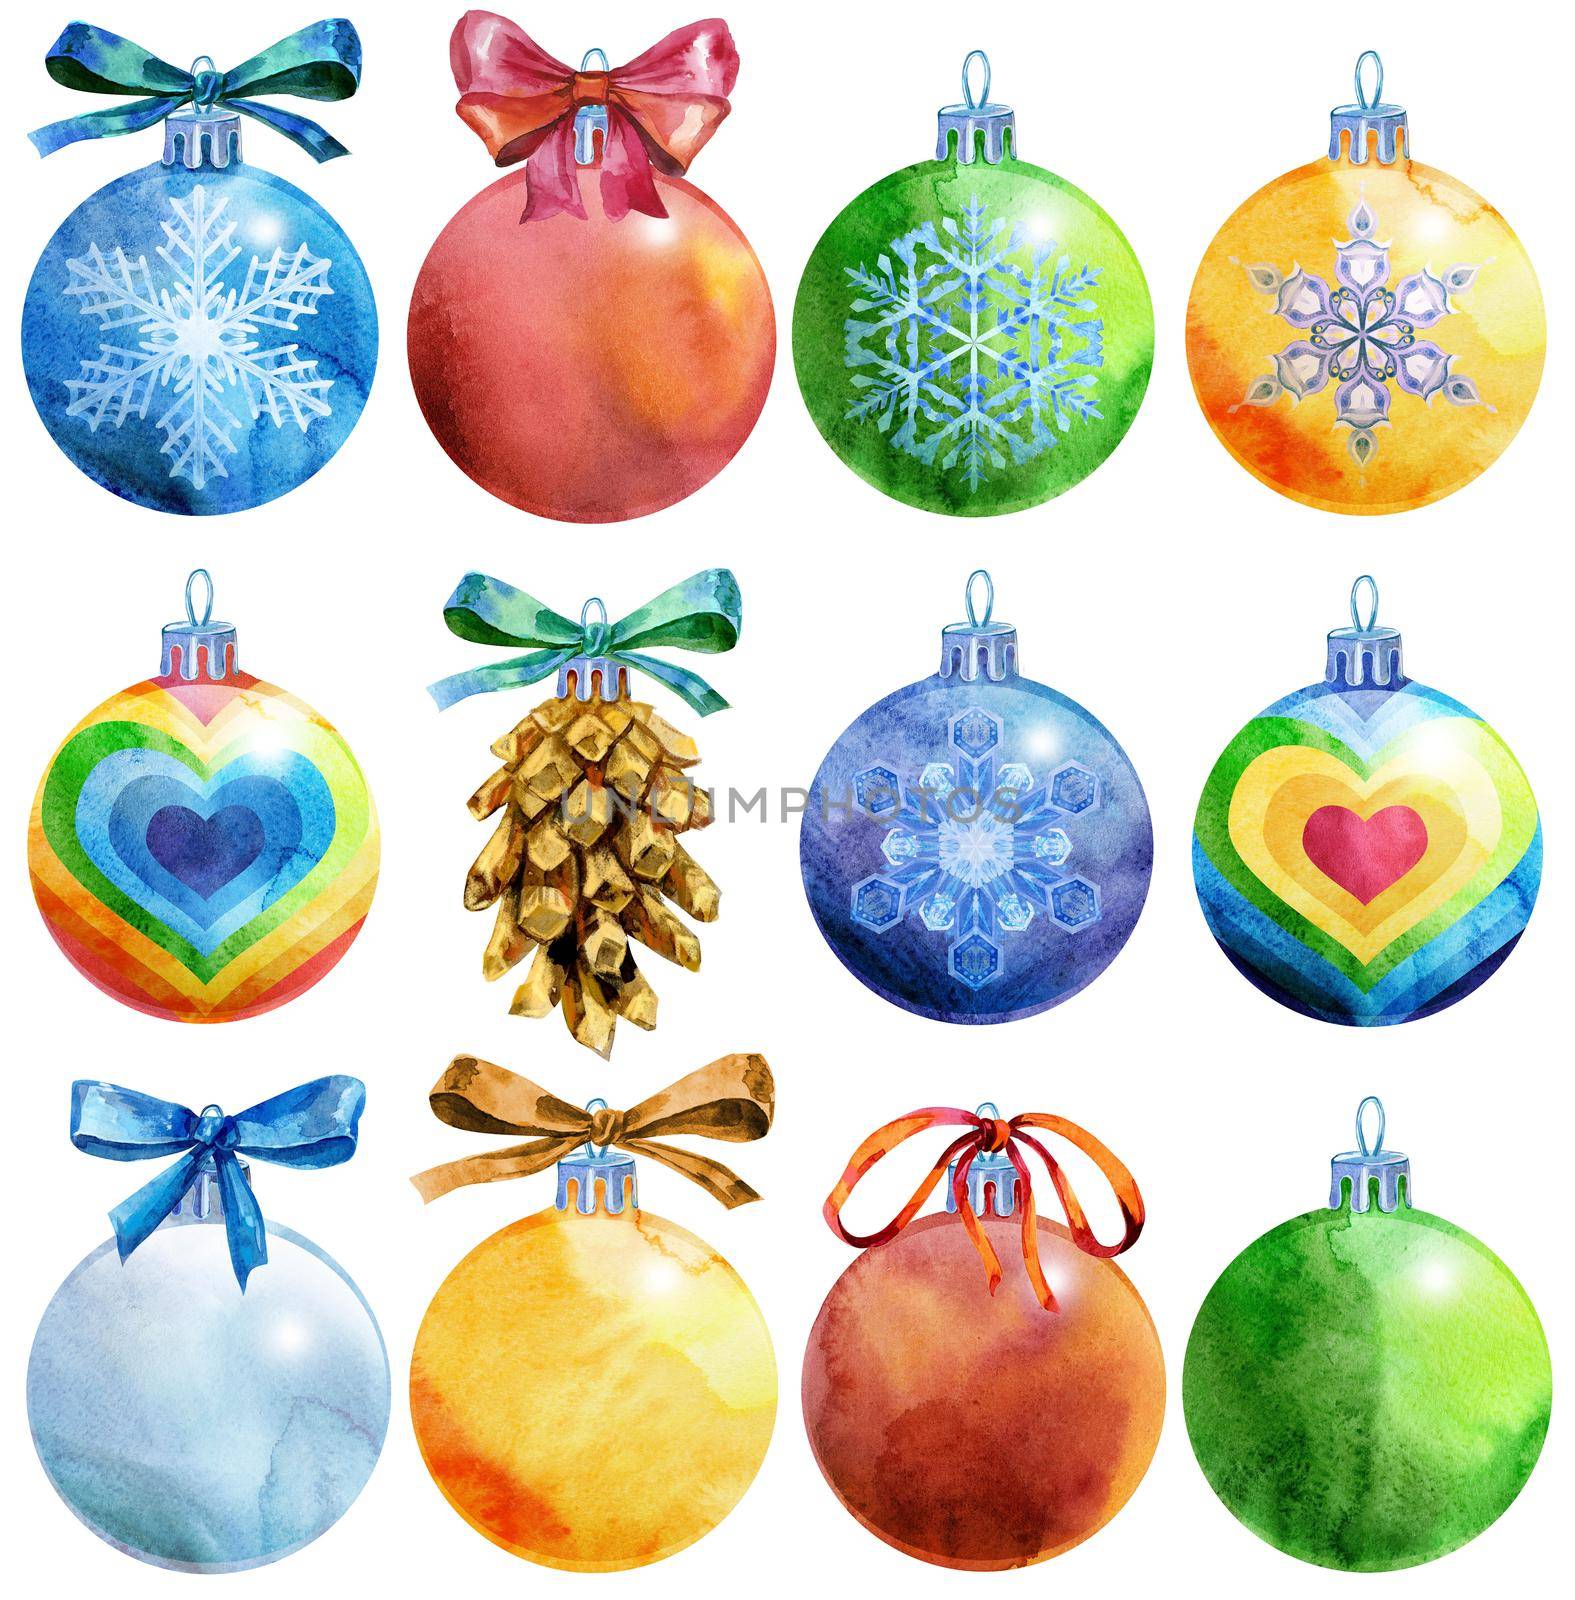 Set3 of Watercolor Christmas tree ball with image of pig and snowflakes. Card for your creativity